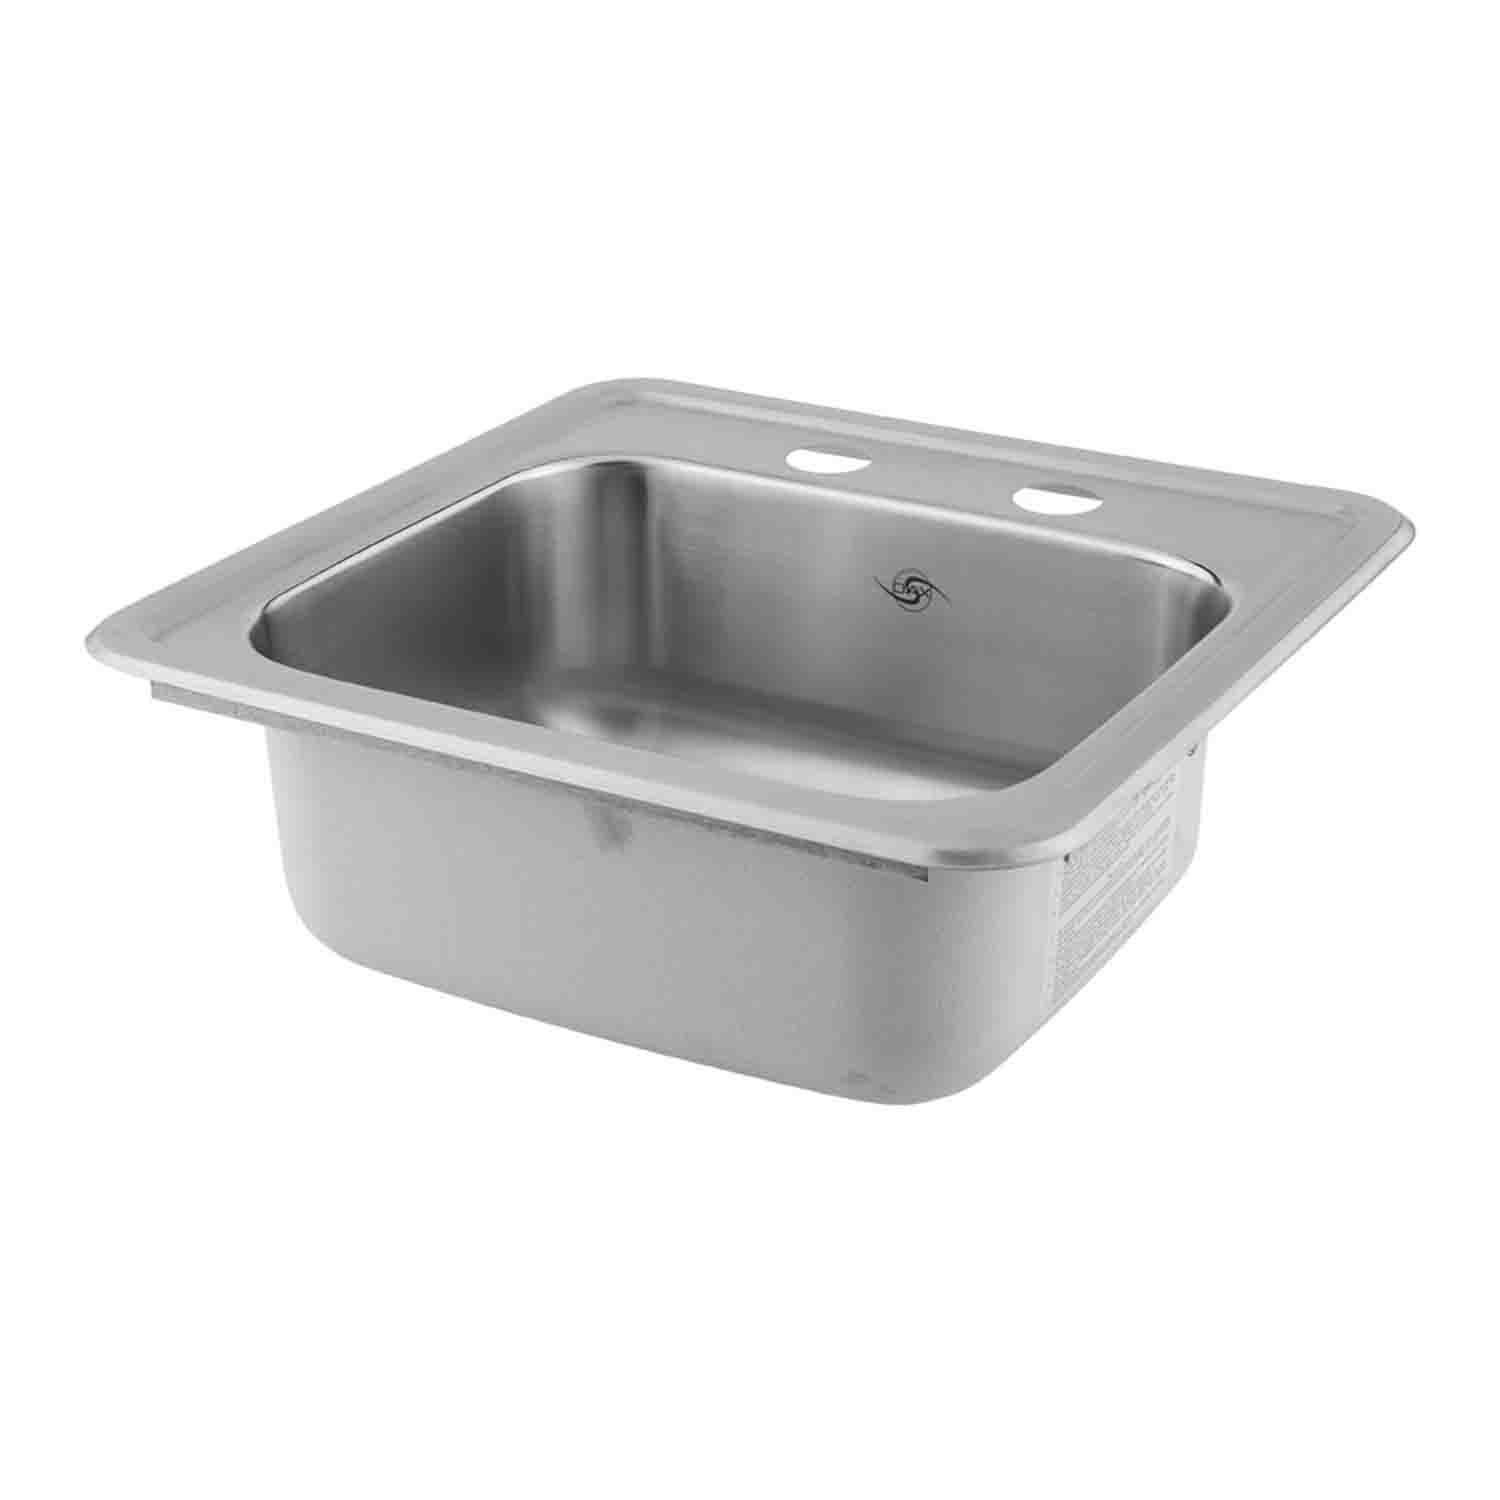 DAX  Single Bowl Top Mount Kitchen Sink, 23 Gauge Stainless Steel, Brushed Finish , 15 x 15 x 5-1/2 Inches (DAX-OM-1515)